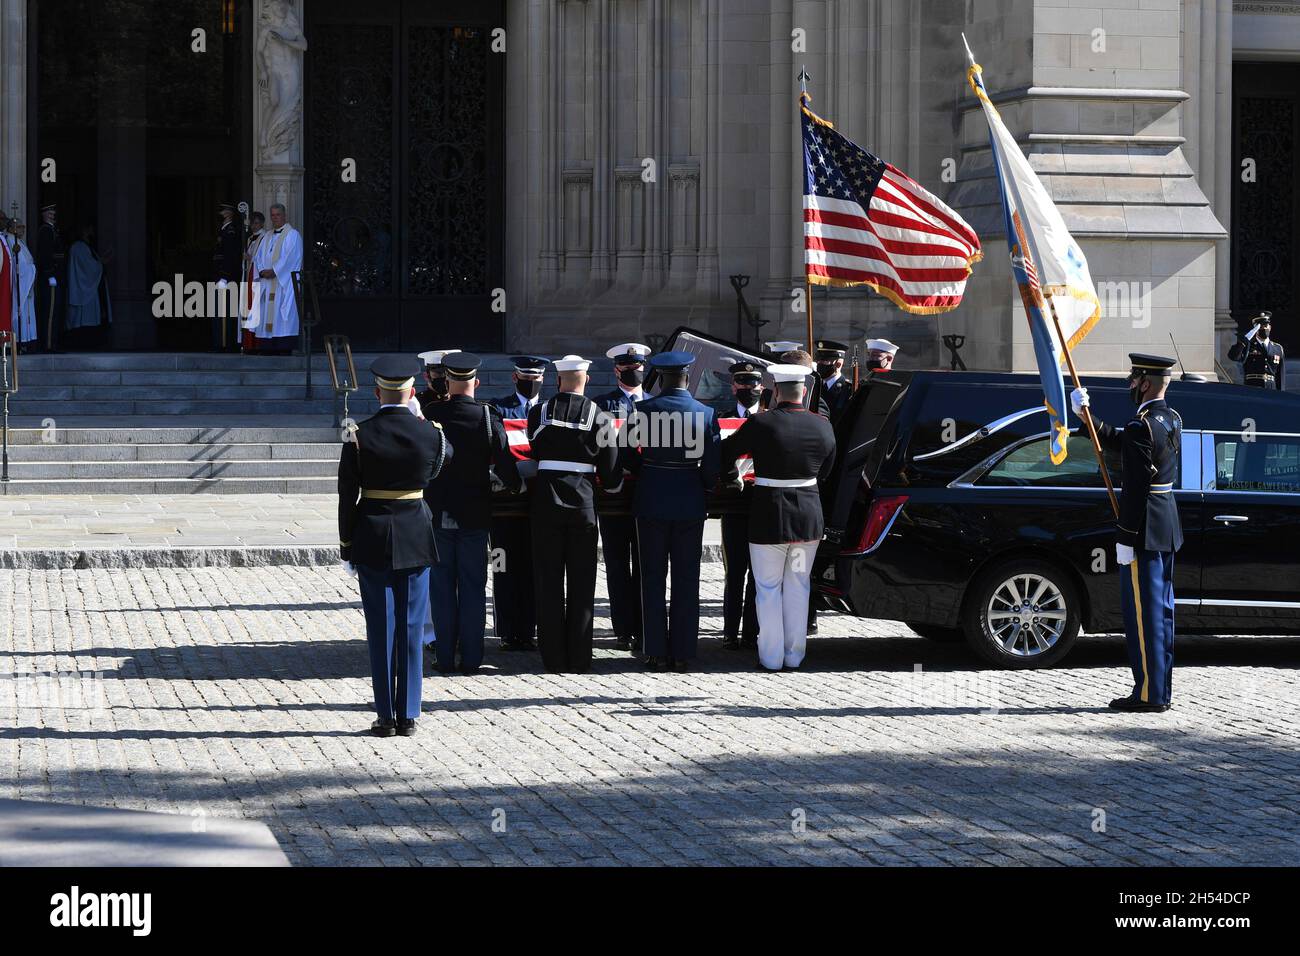 Washington, United States. 05th Nov, 2021. U.S. Armed Forces Honor Guard carries the casket of former U.S. Secretary of State Colin Powell during his funeral service at Washington National Cathedral, November 5, 2021 in Washington, DC Credit: Cpl. XaViera Masline/U.S. Army/Alamy Live News Stock Photo